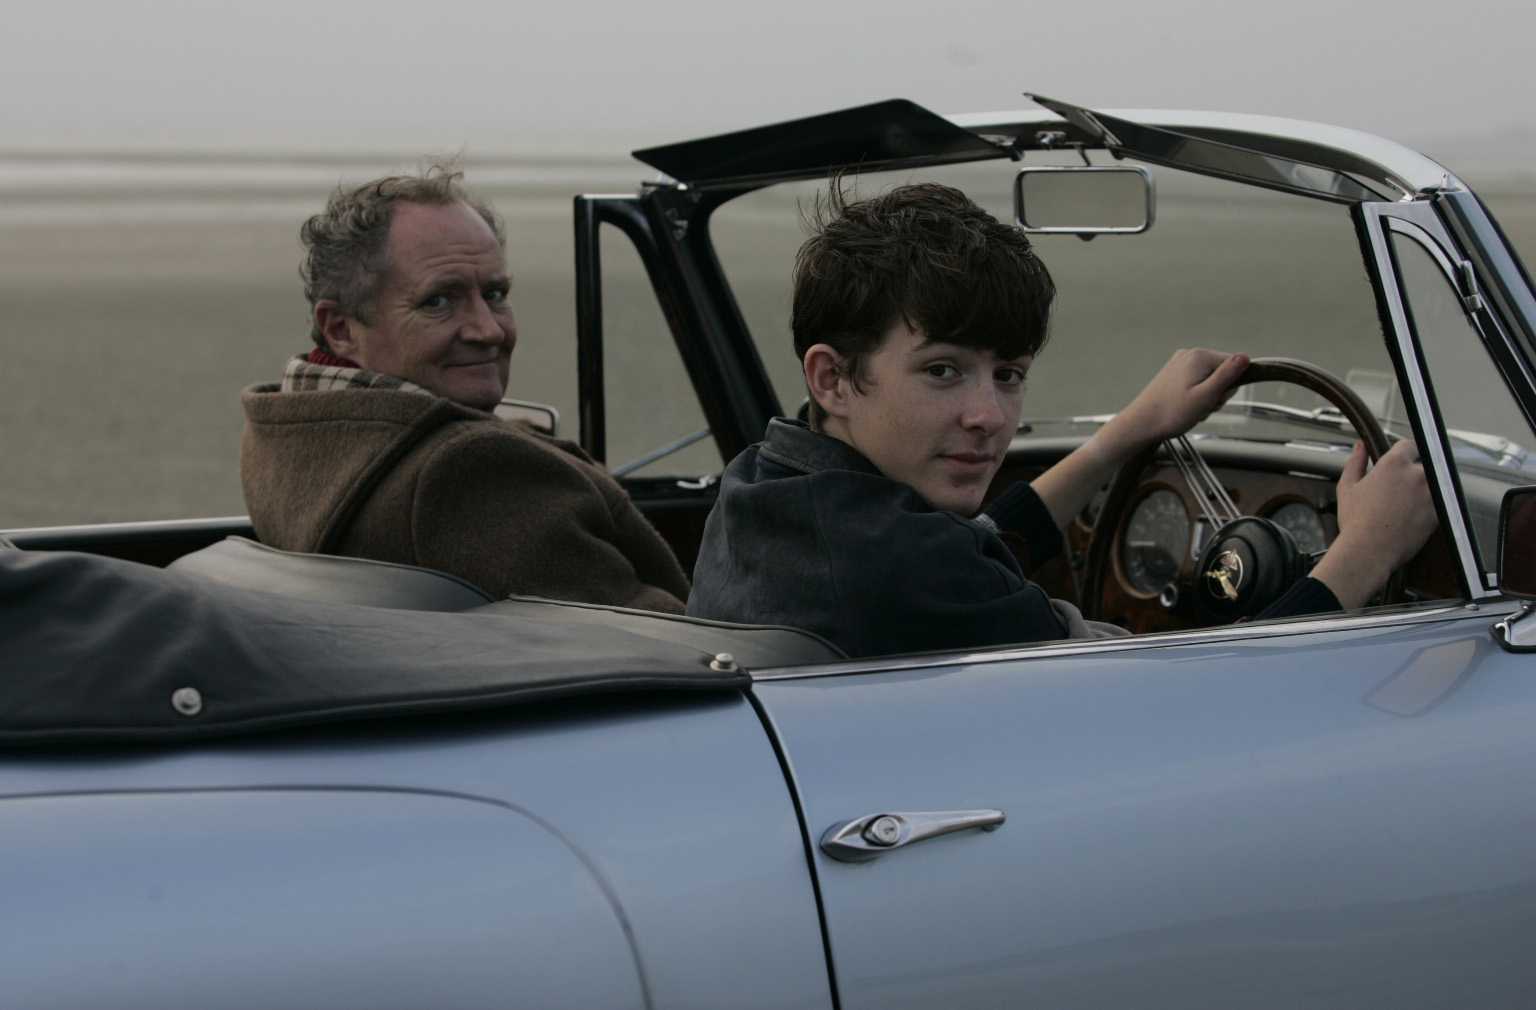 Arthur and Blake drive a car on the beach. Yes, it's quite safe, I assure you.